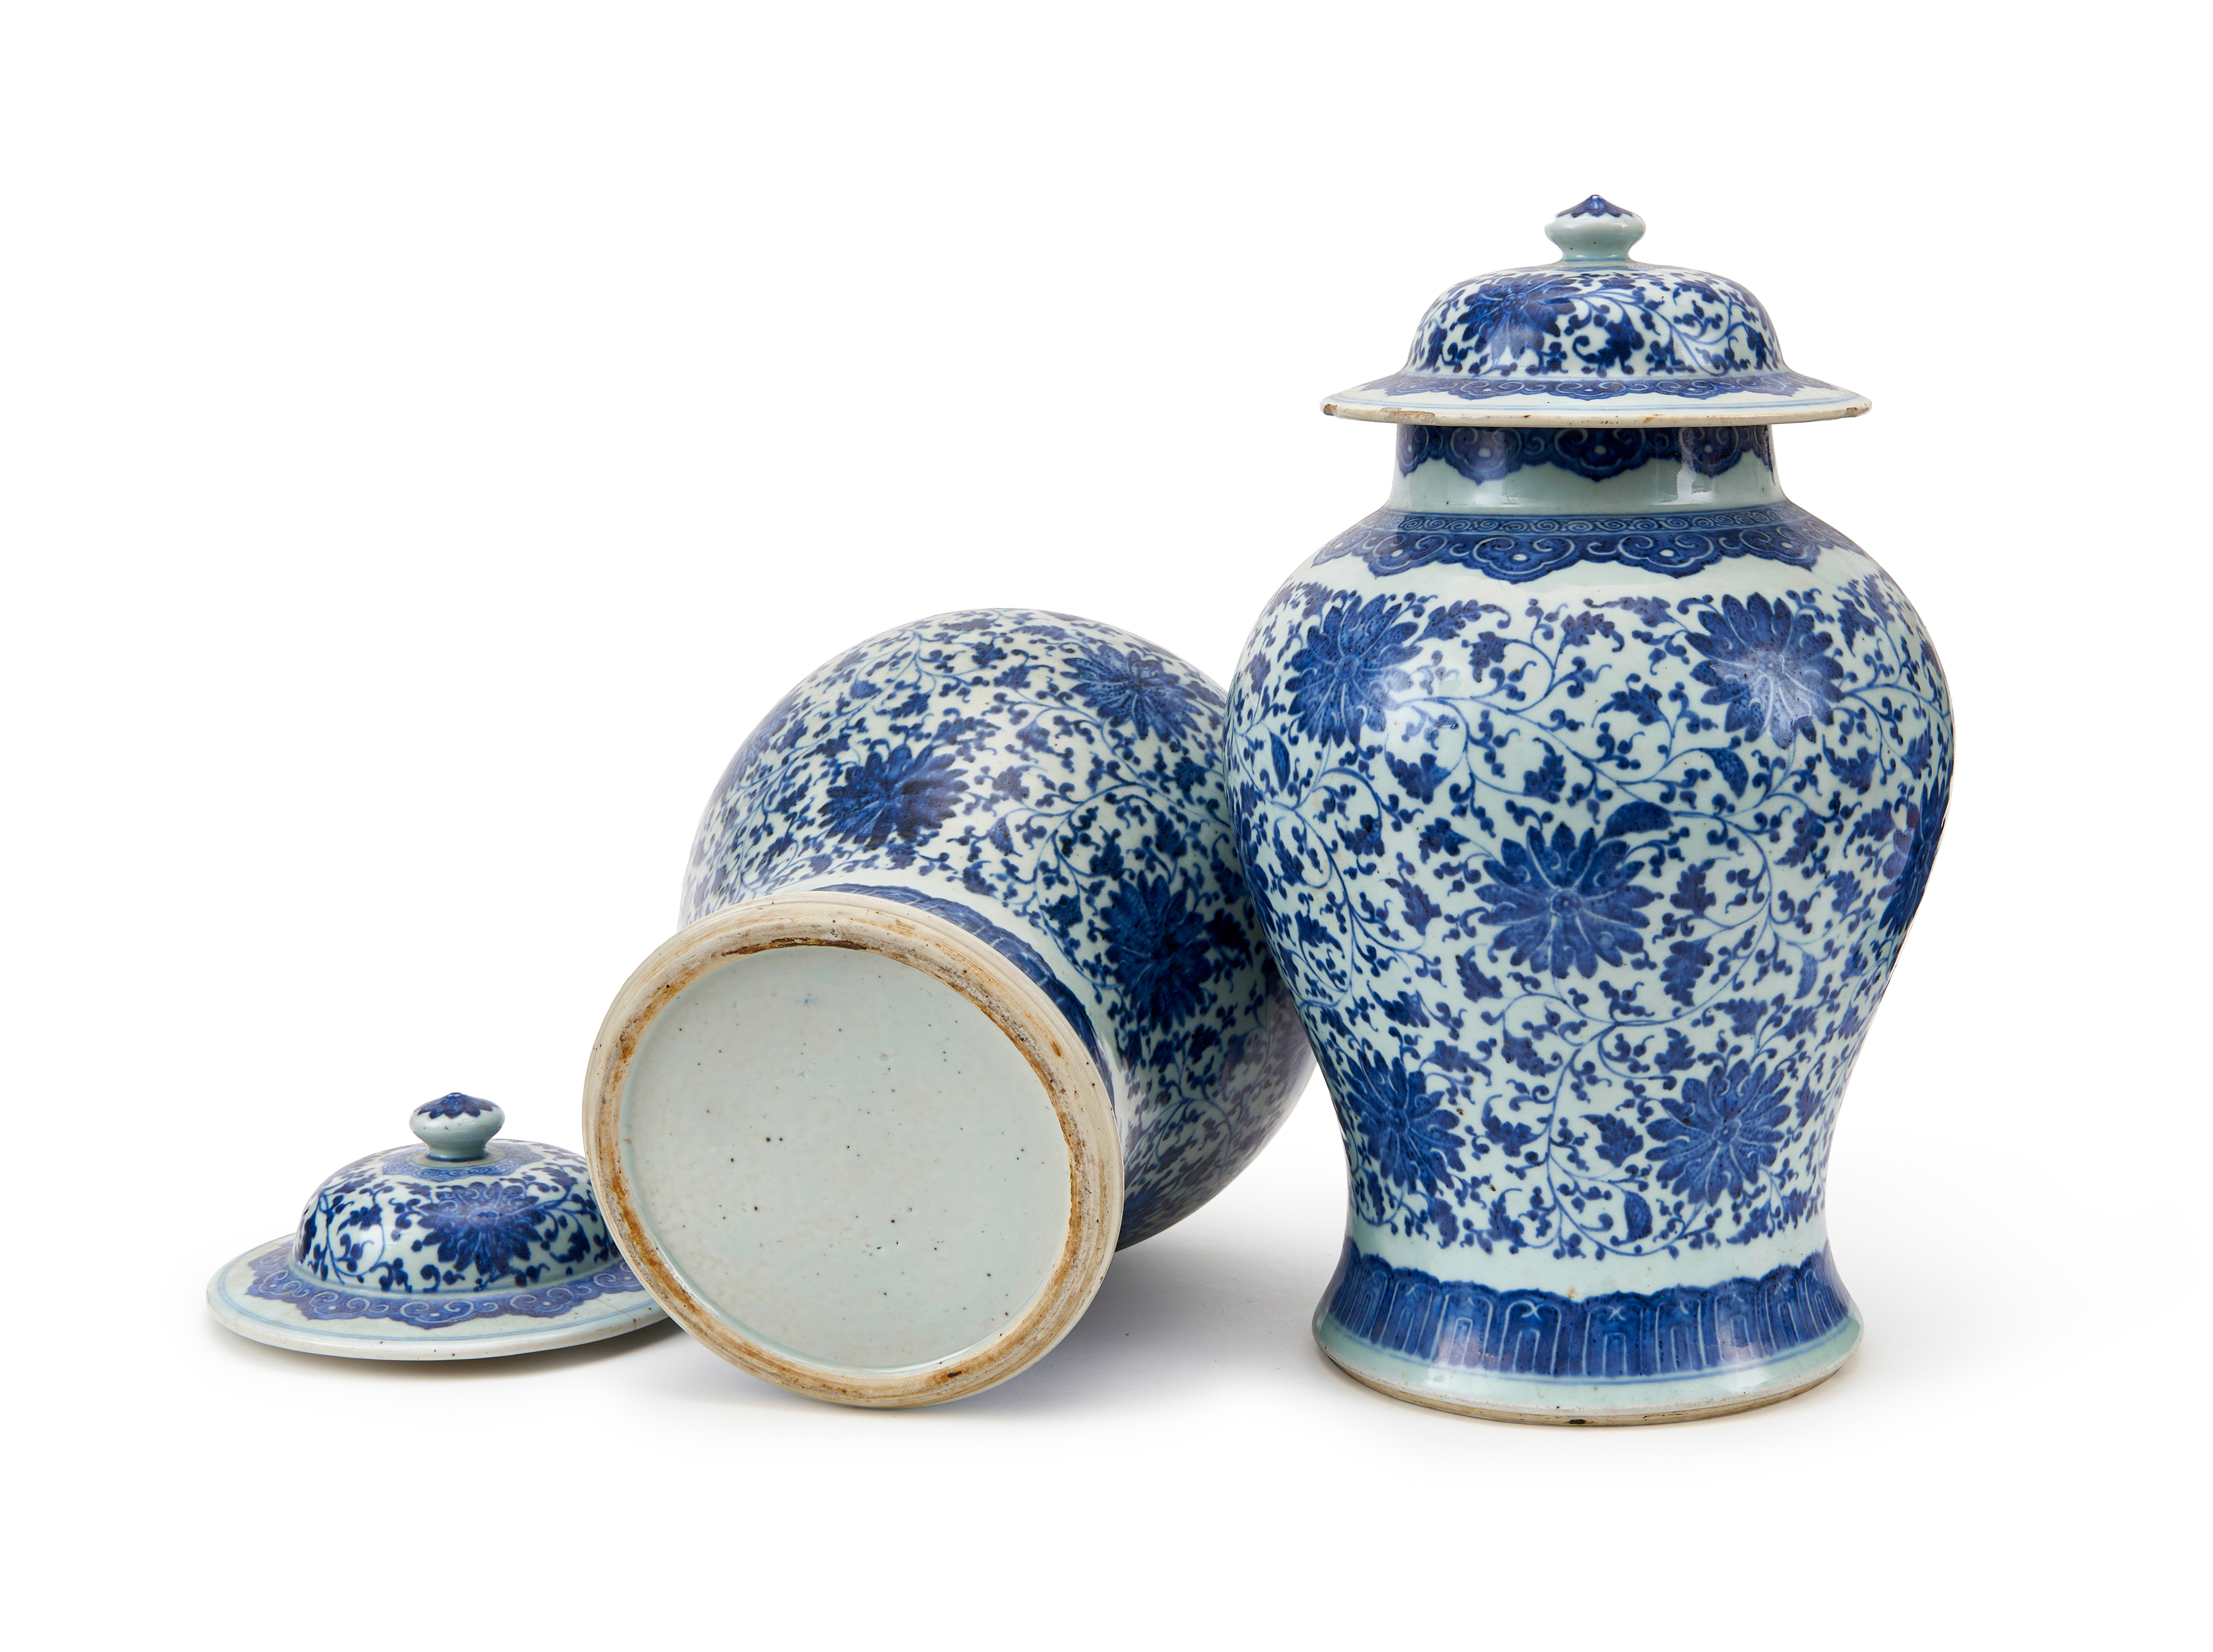 A PAIR OF BLUE & WHITE VASES, QING DYNASTY (1644-1911) - Image 2 of 3